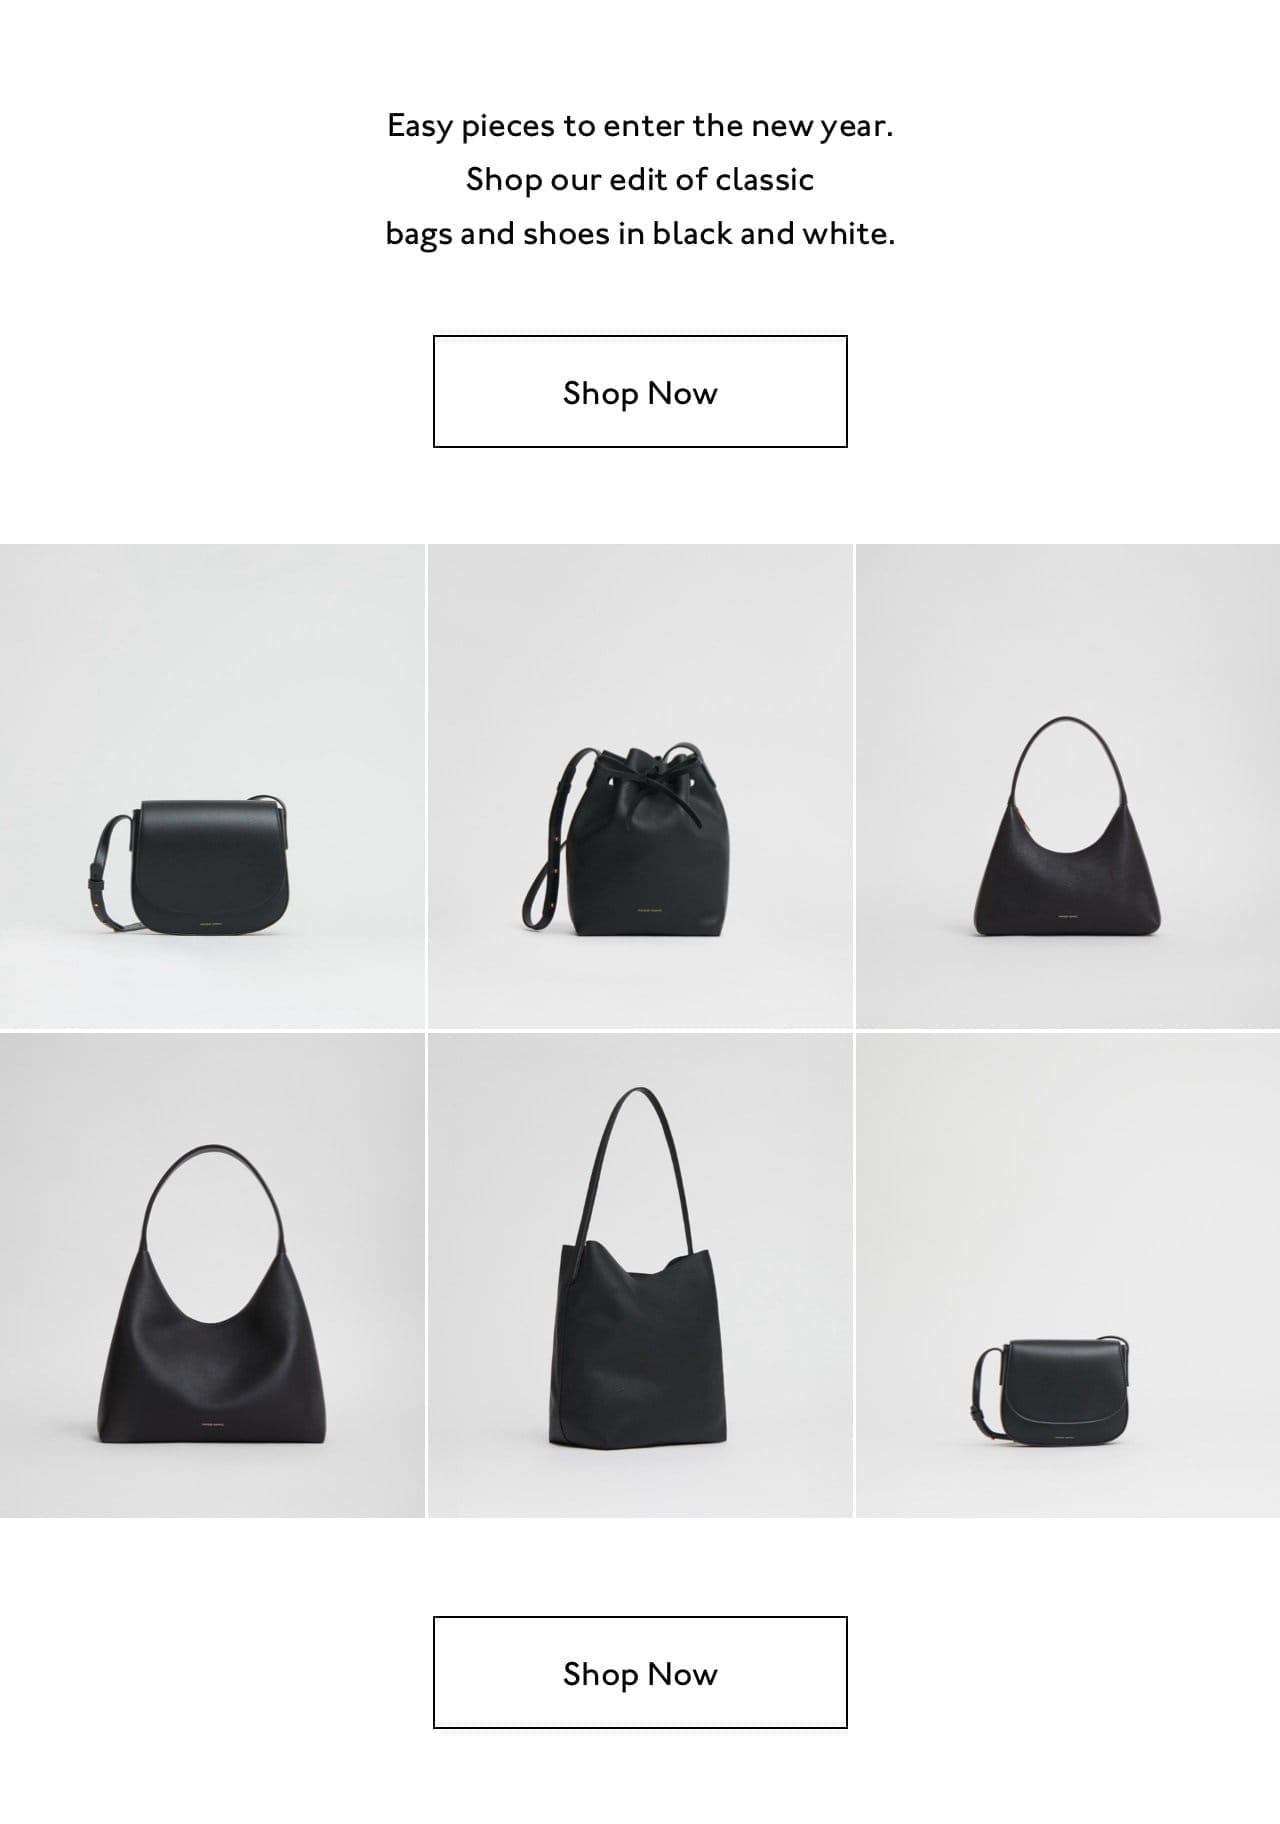 Shop our edit of classic bags and shoes in black and white.